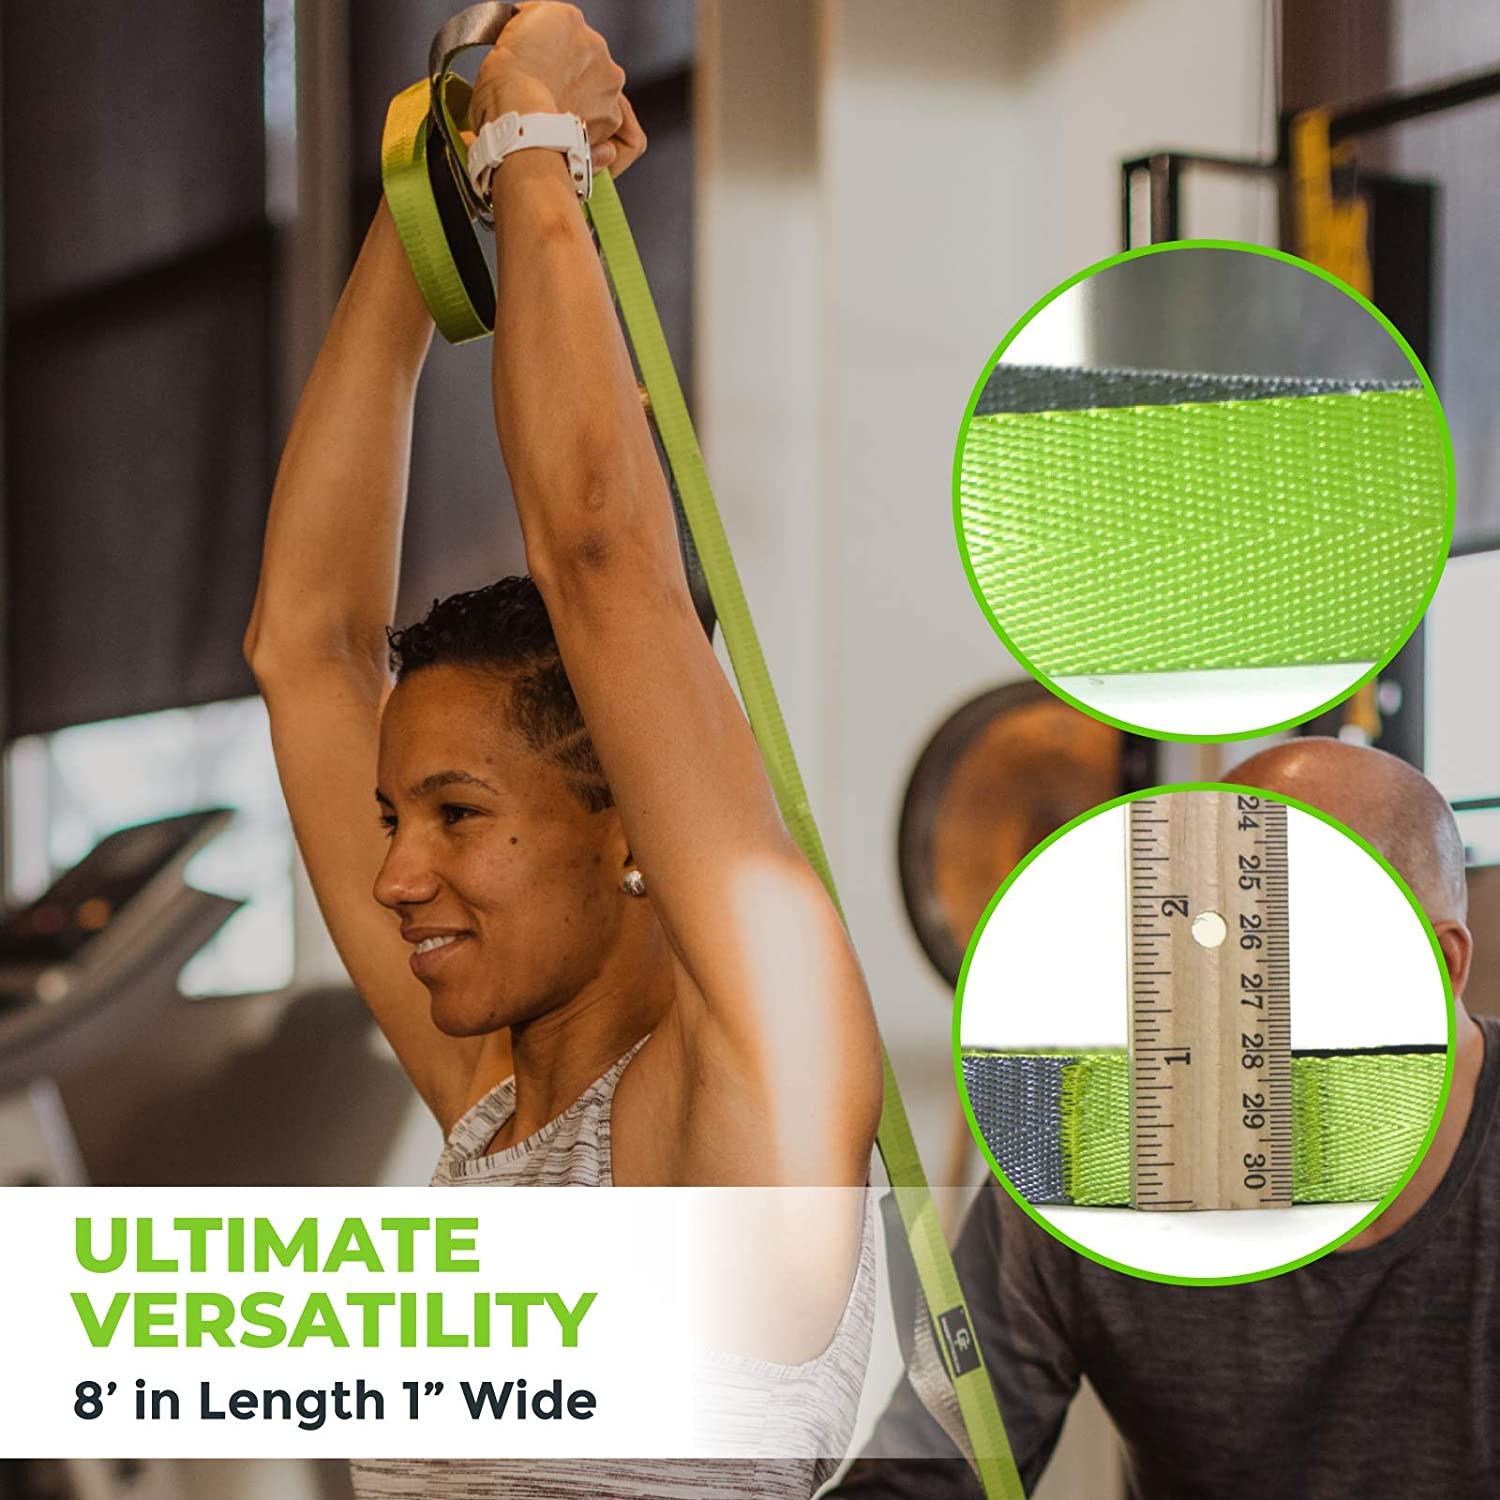 Gradient Fitness Stretching Strap for Physical Therapy, 12 Multi-Loop Stretch  Strap 1 W x 8' L, Neoprene Handles, Physical Therapy Equipment, Yoga Straps  for Stretching, Leg Stretcher Green/Gray